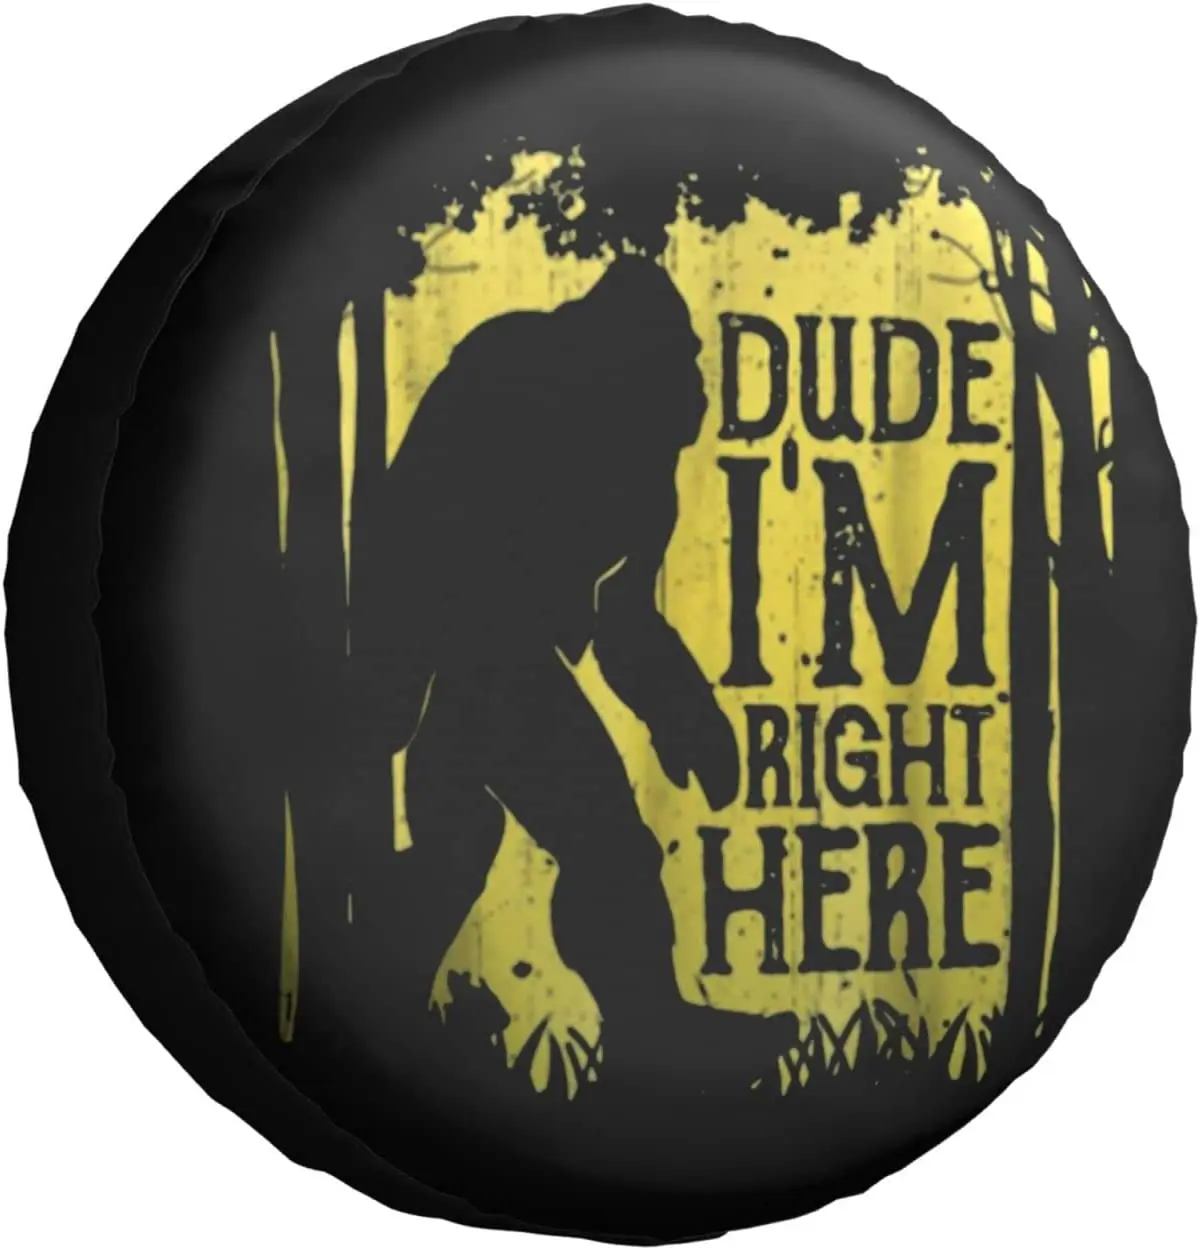 

Bigfoot Sasquatch Dude I'm Right Here 1417 Inch Tire Cover Protectors Weatherproof DustProof for Trailer Rv SUV Truck Camper T